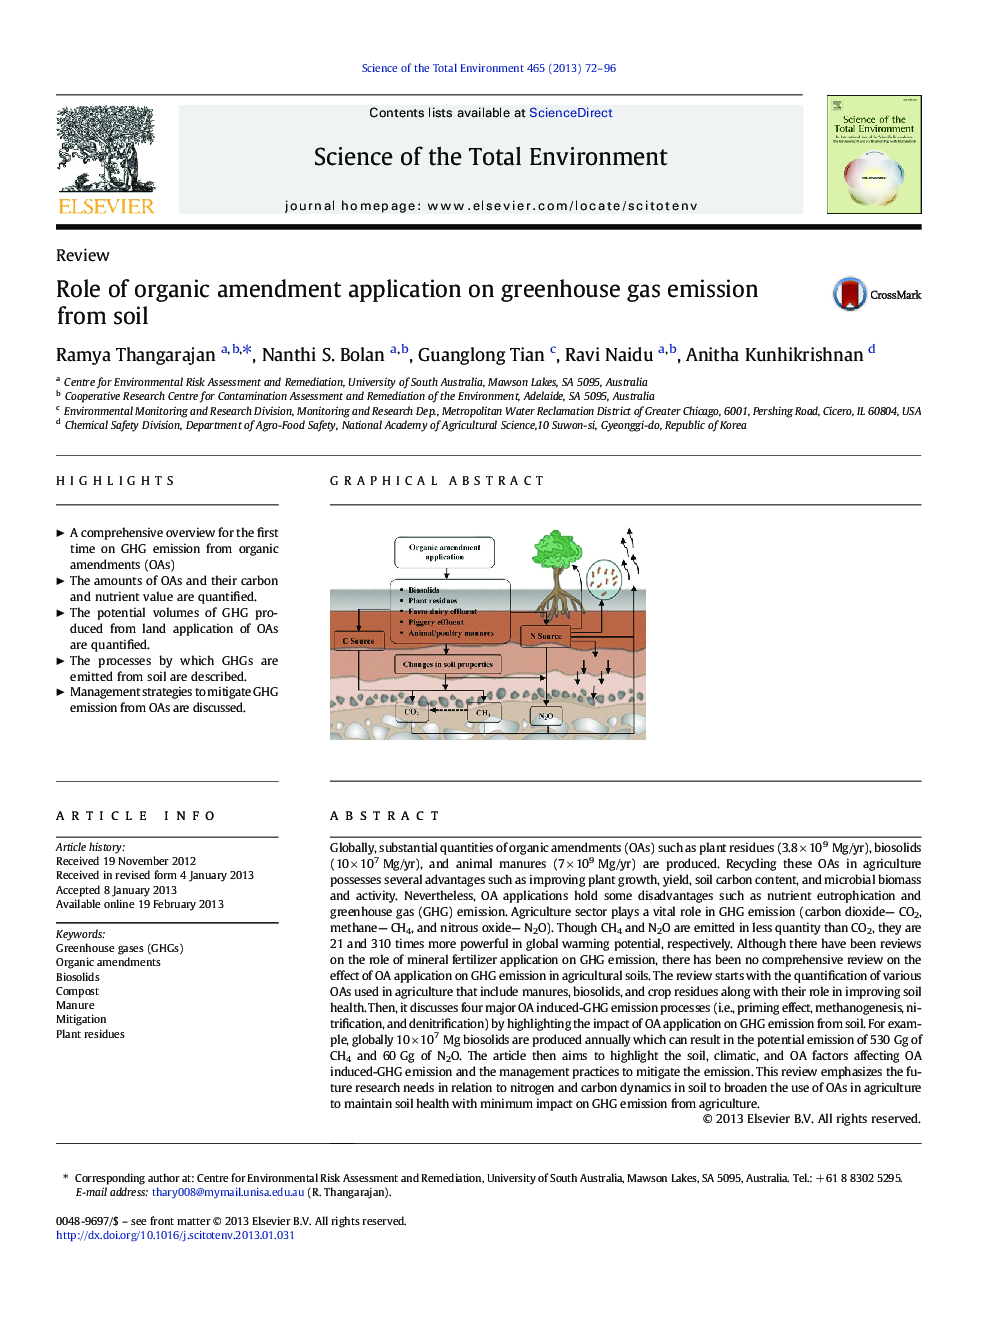 Role of organic amendment application on greenhouse gas emission from soil